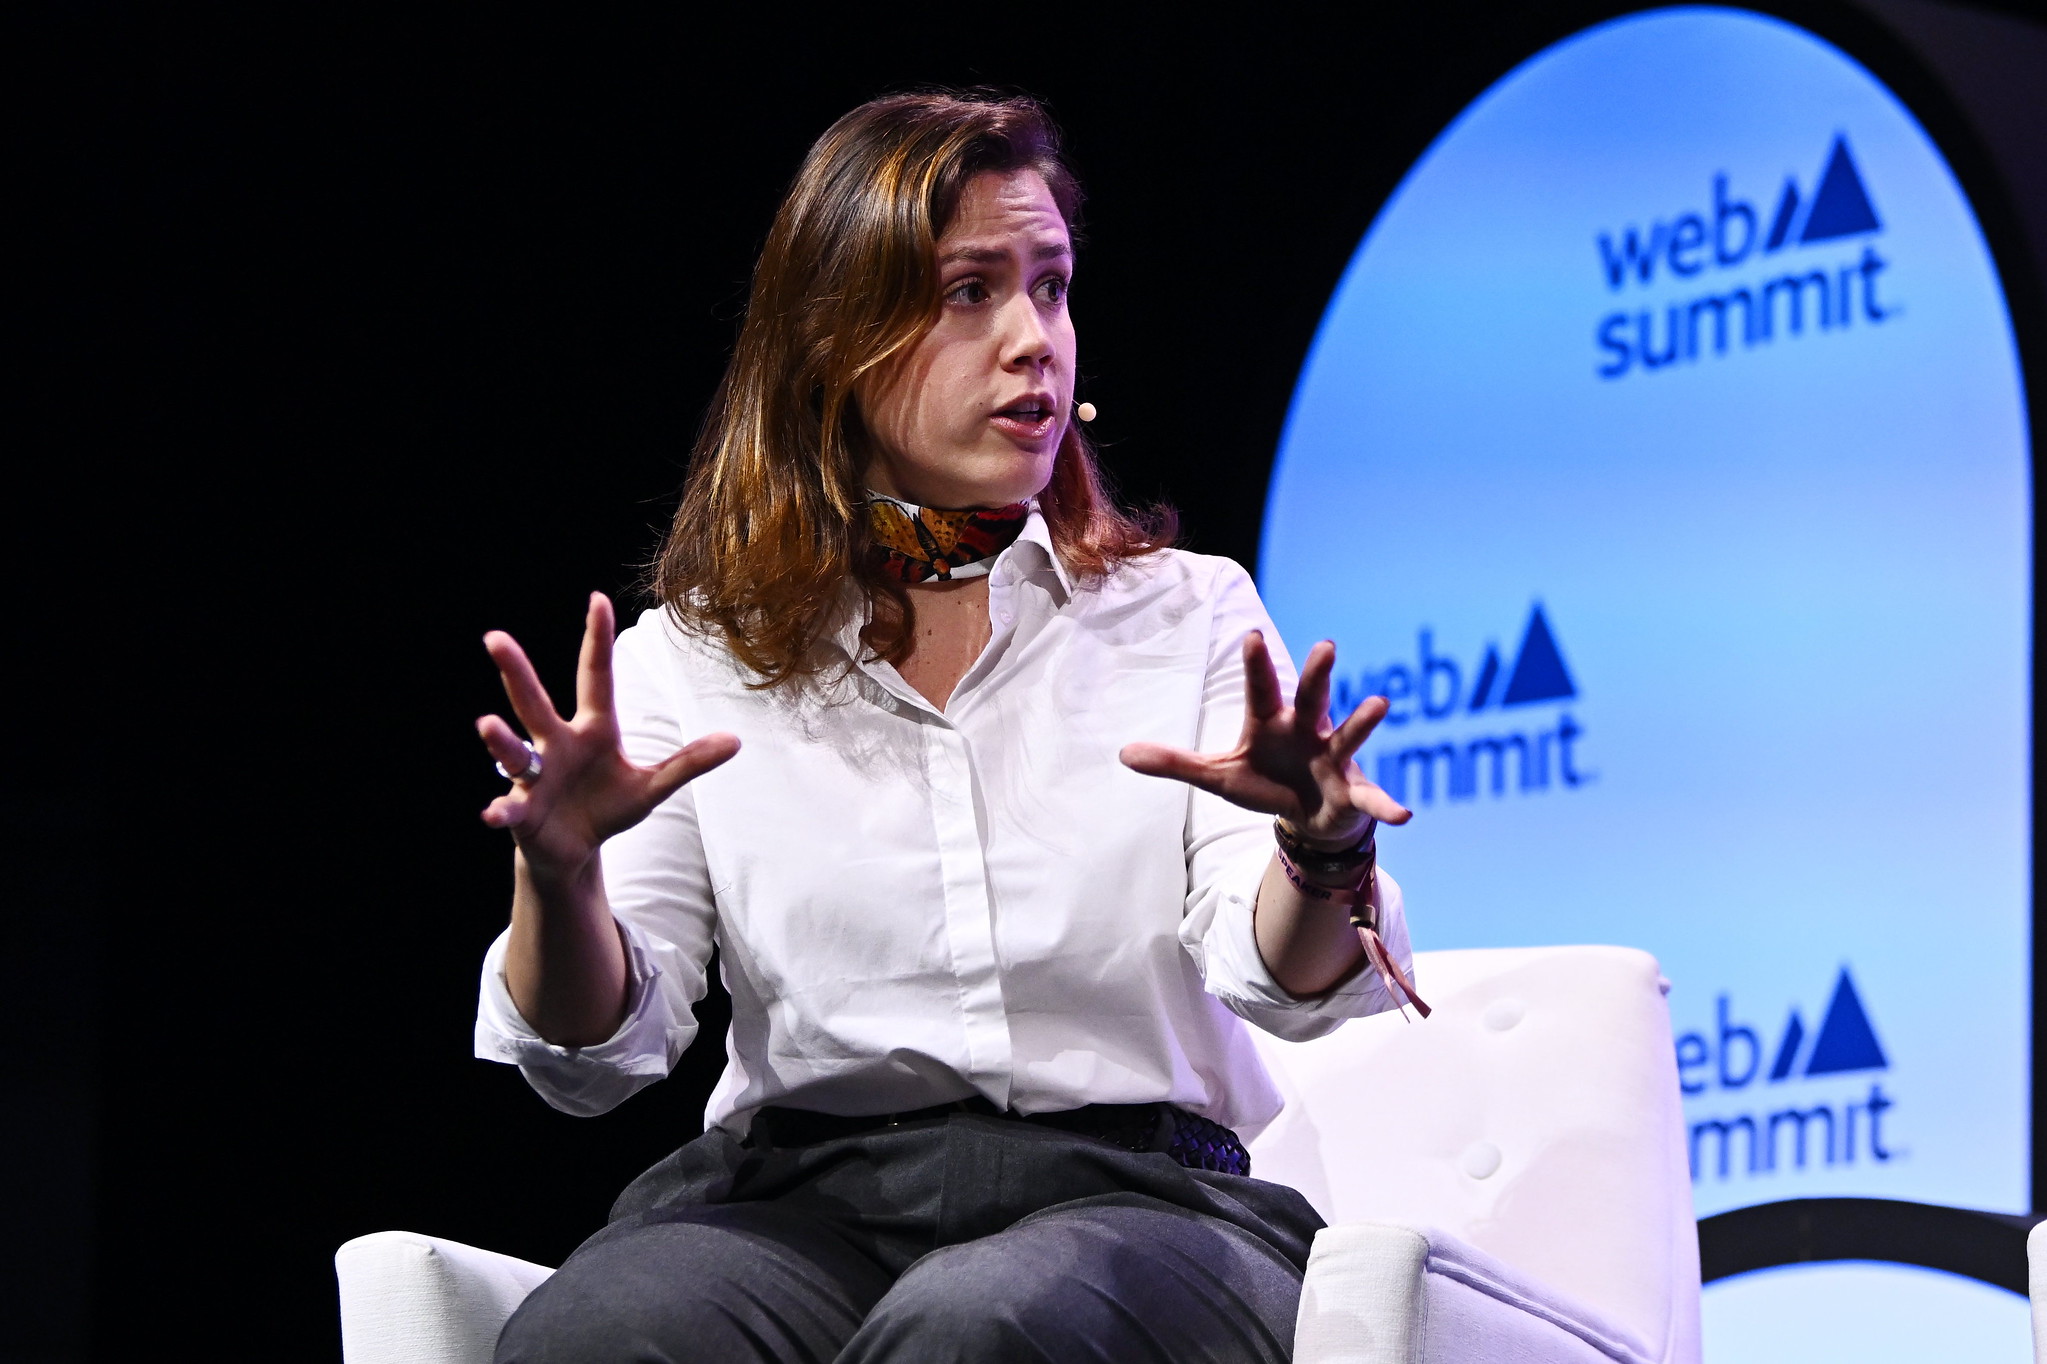 Lidia Pereira, Member, European Parliament on Energy Stage during day two of Web Summit 2023 at the Altice Arena in Lisbon, Portugal.